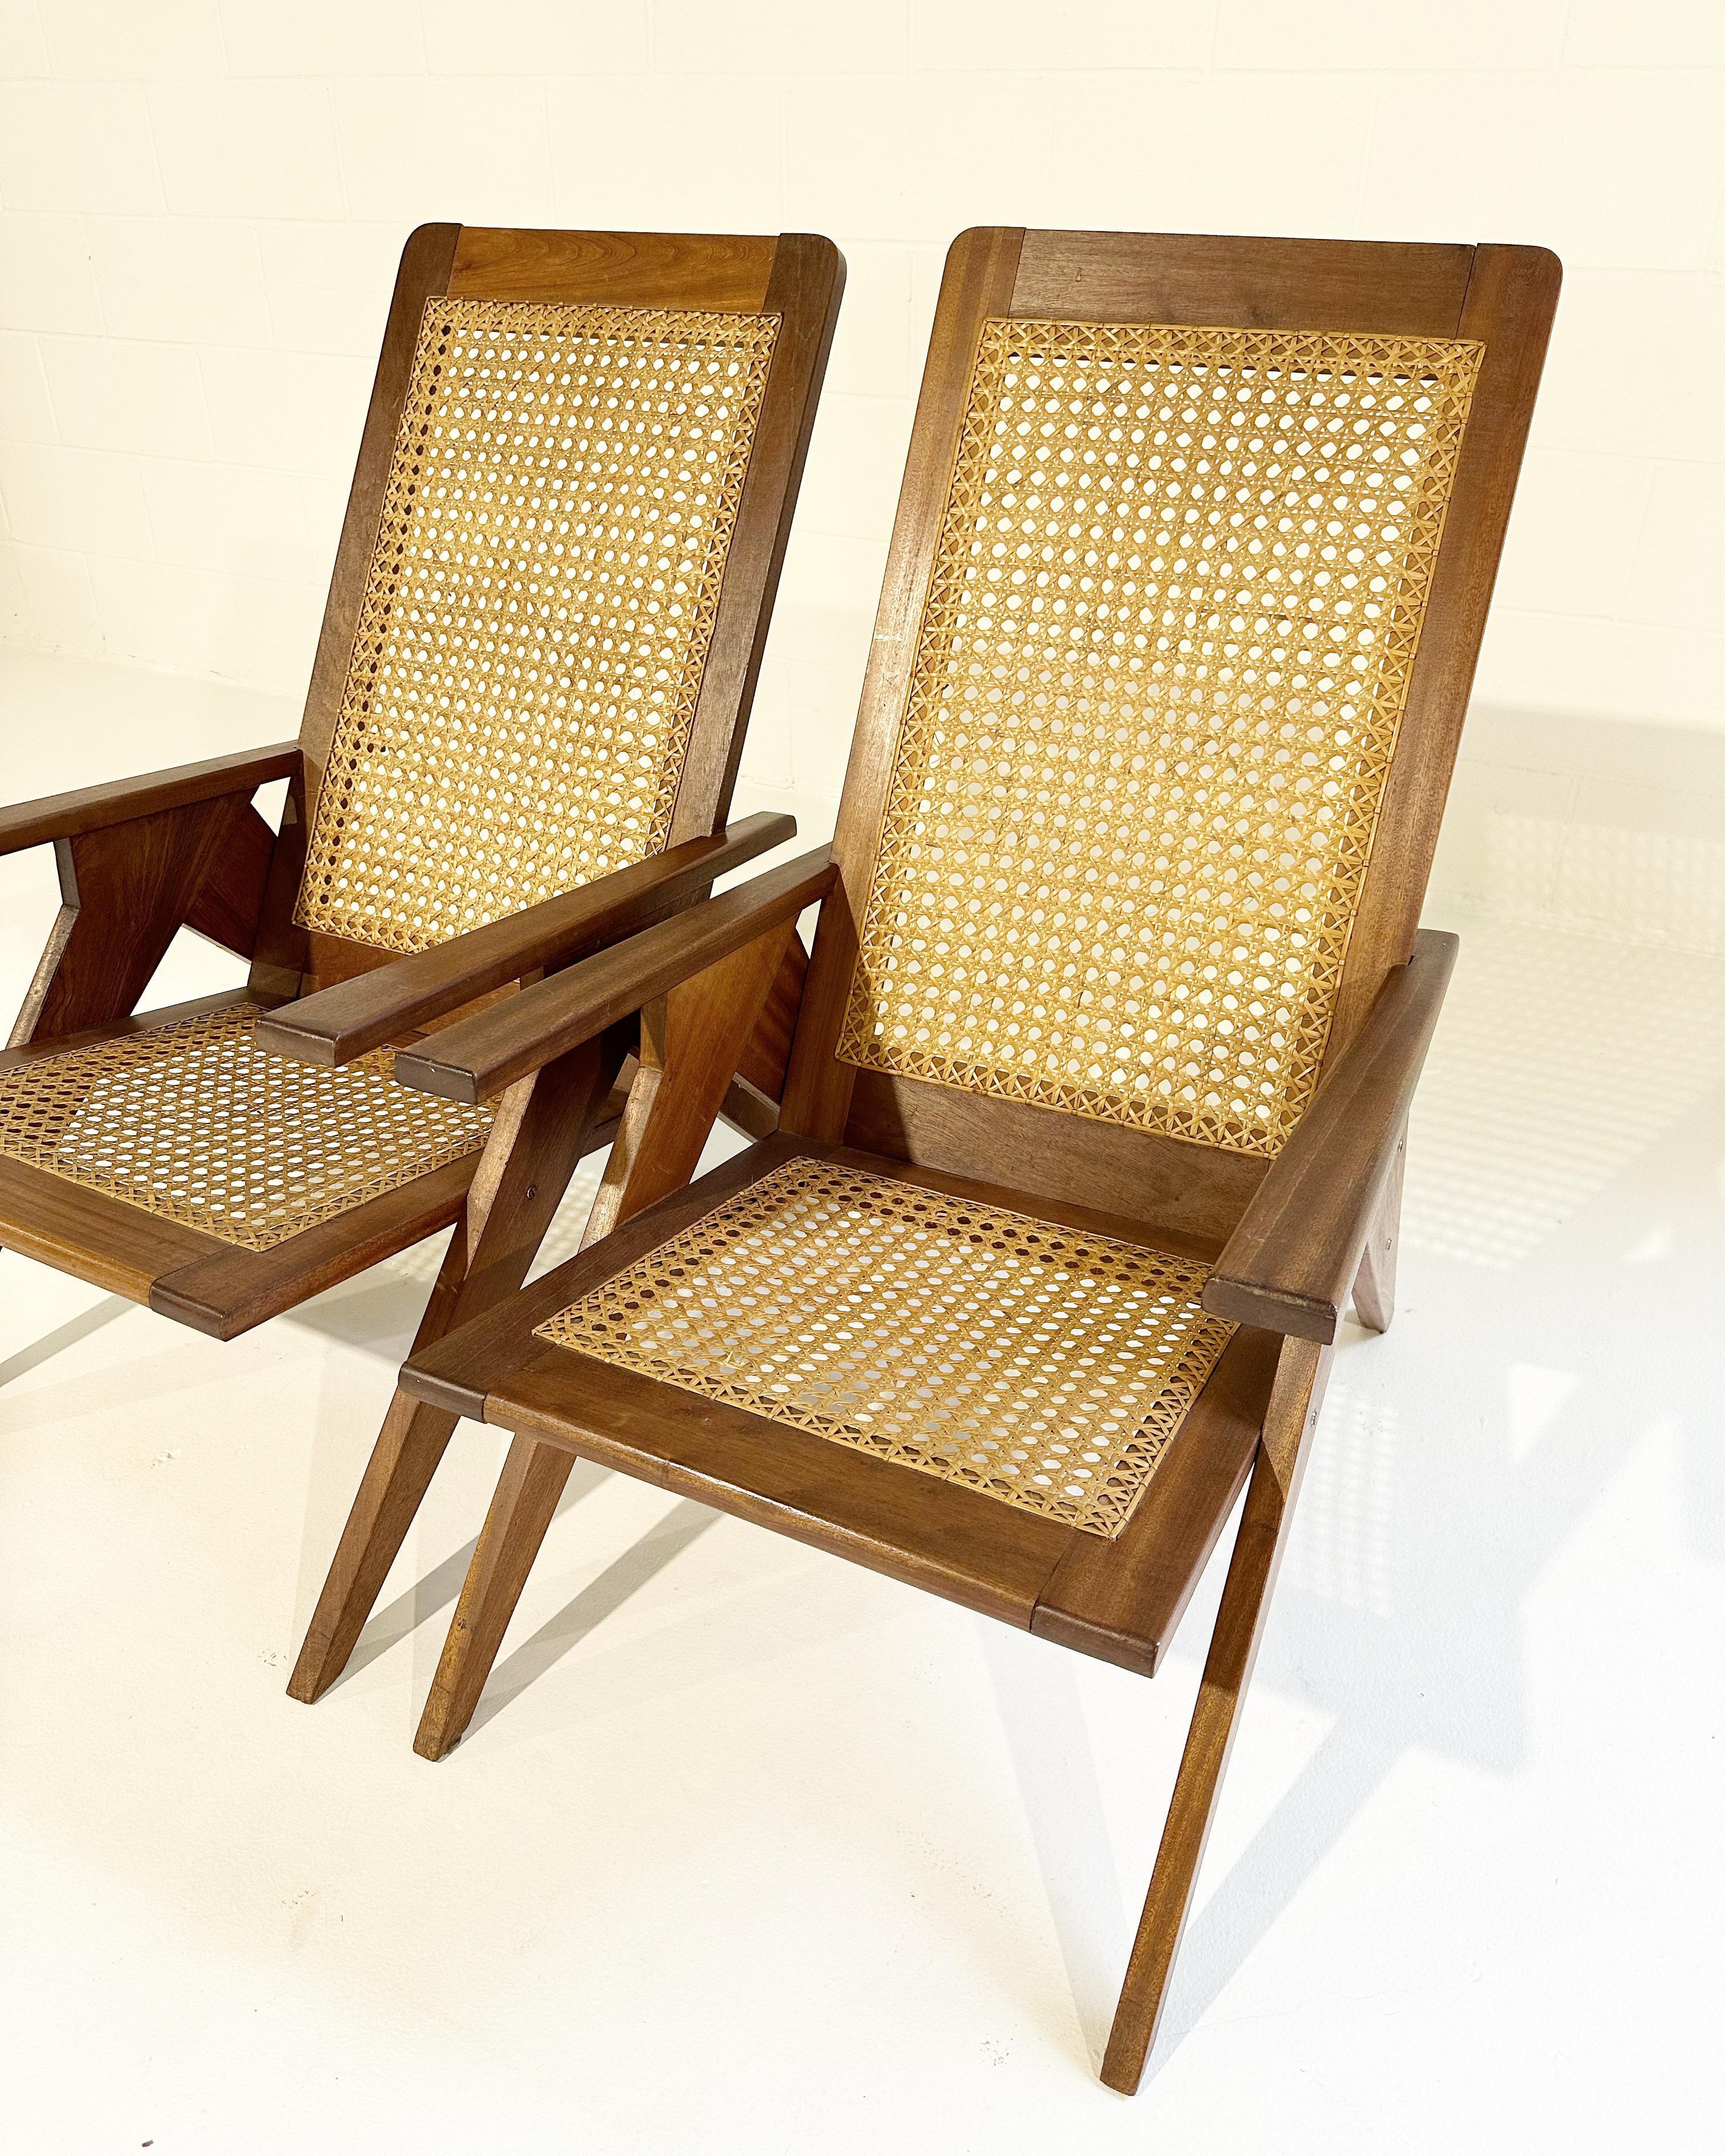 A gorgeous pair of French chairs, reminiscent of an Adirondack style. We love the caning with the beautiful mahogany.